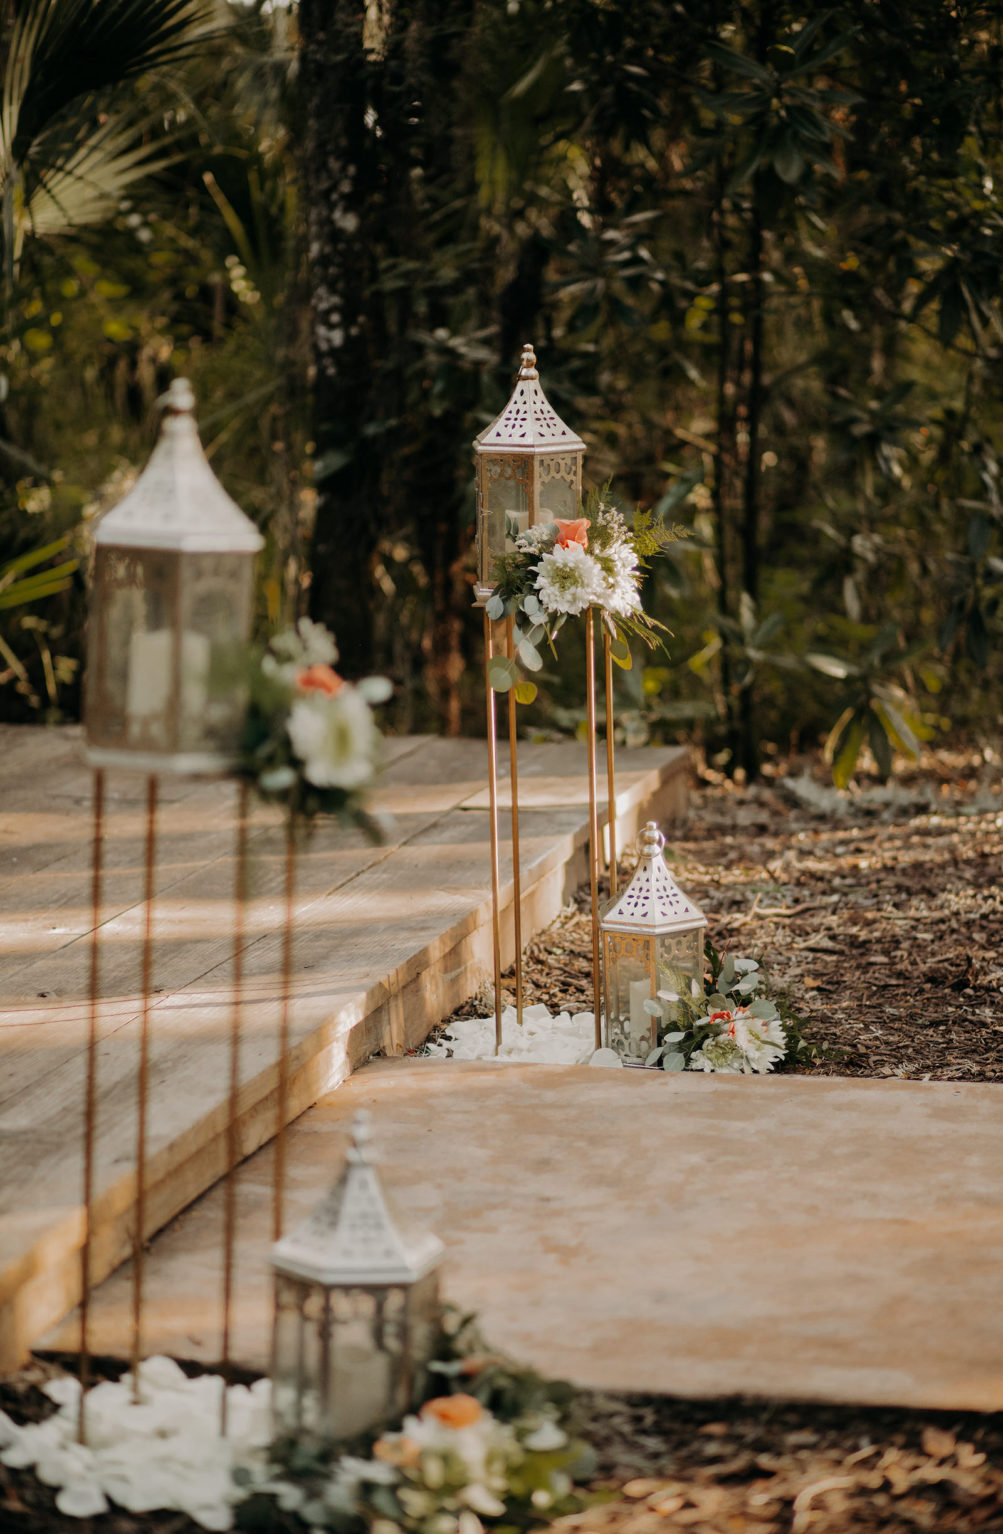 Tampa Rustic Wedding Ceremony Decor, Tall Candle Lanterns with Floral Arrangements | Plant City Wedding Venue Florida Rustic Barn Weddings